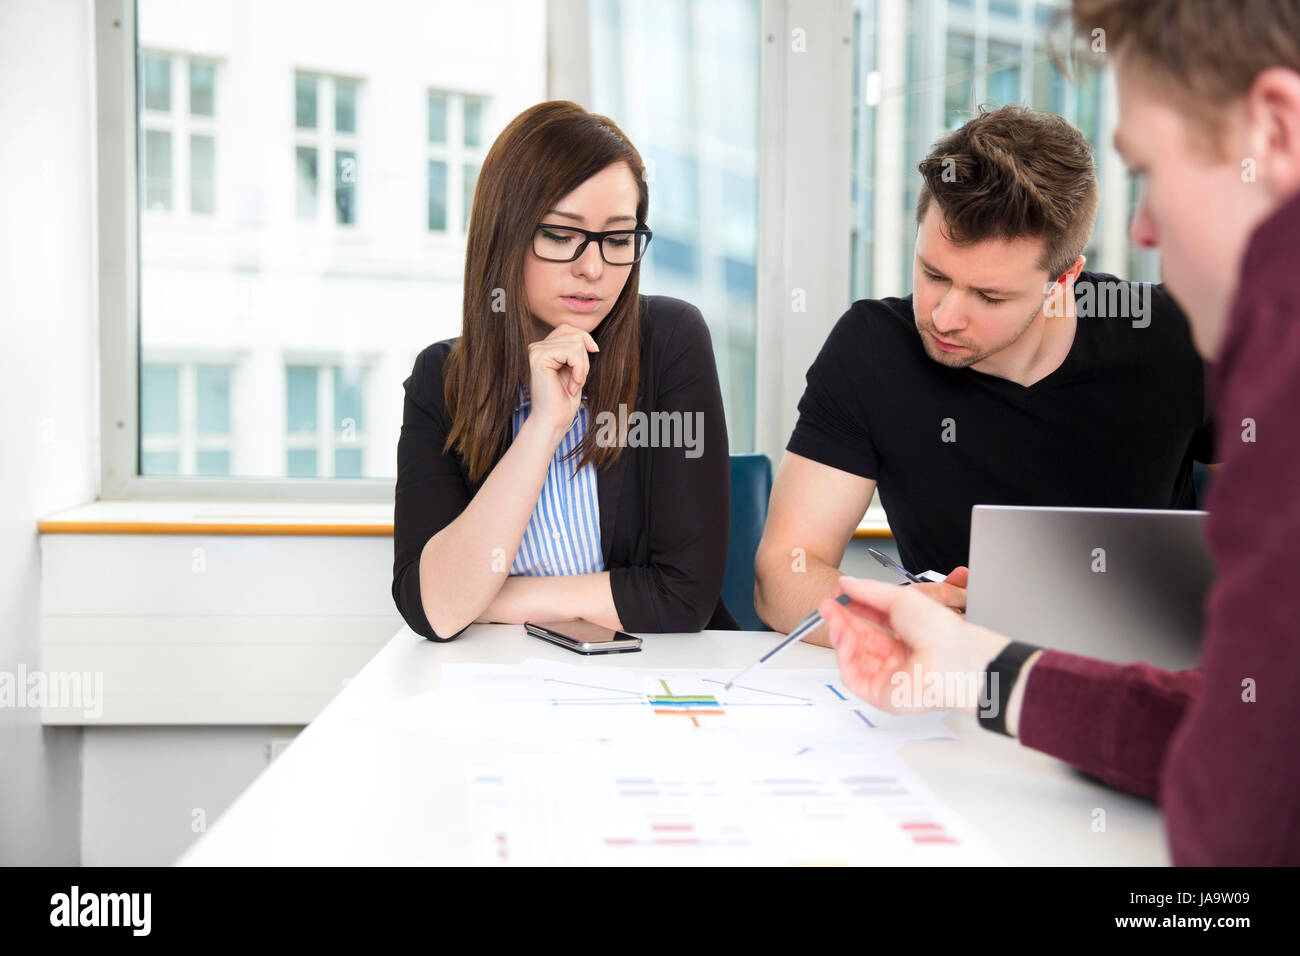 Business People Discussing Over Chart At Desk Stock Photo